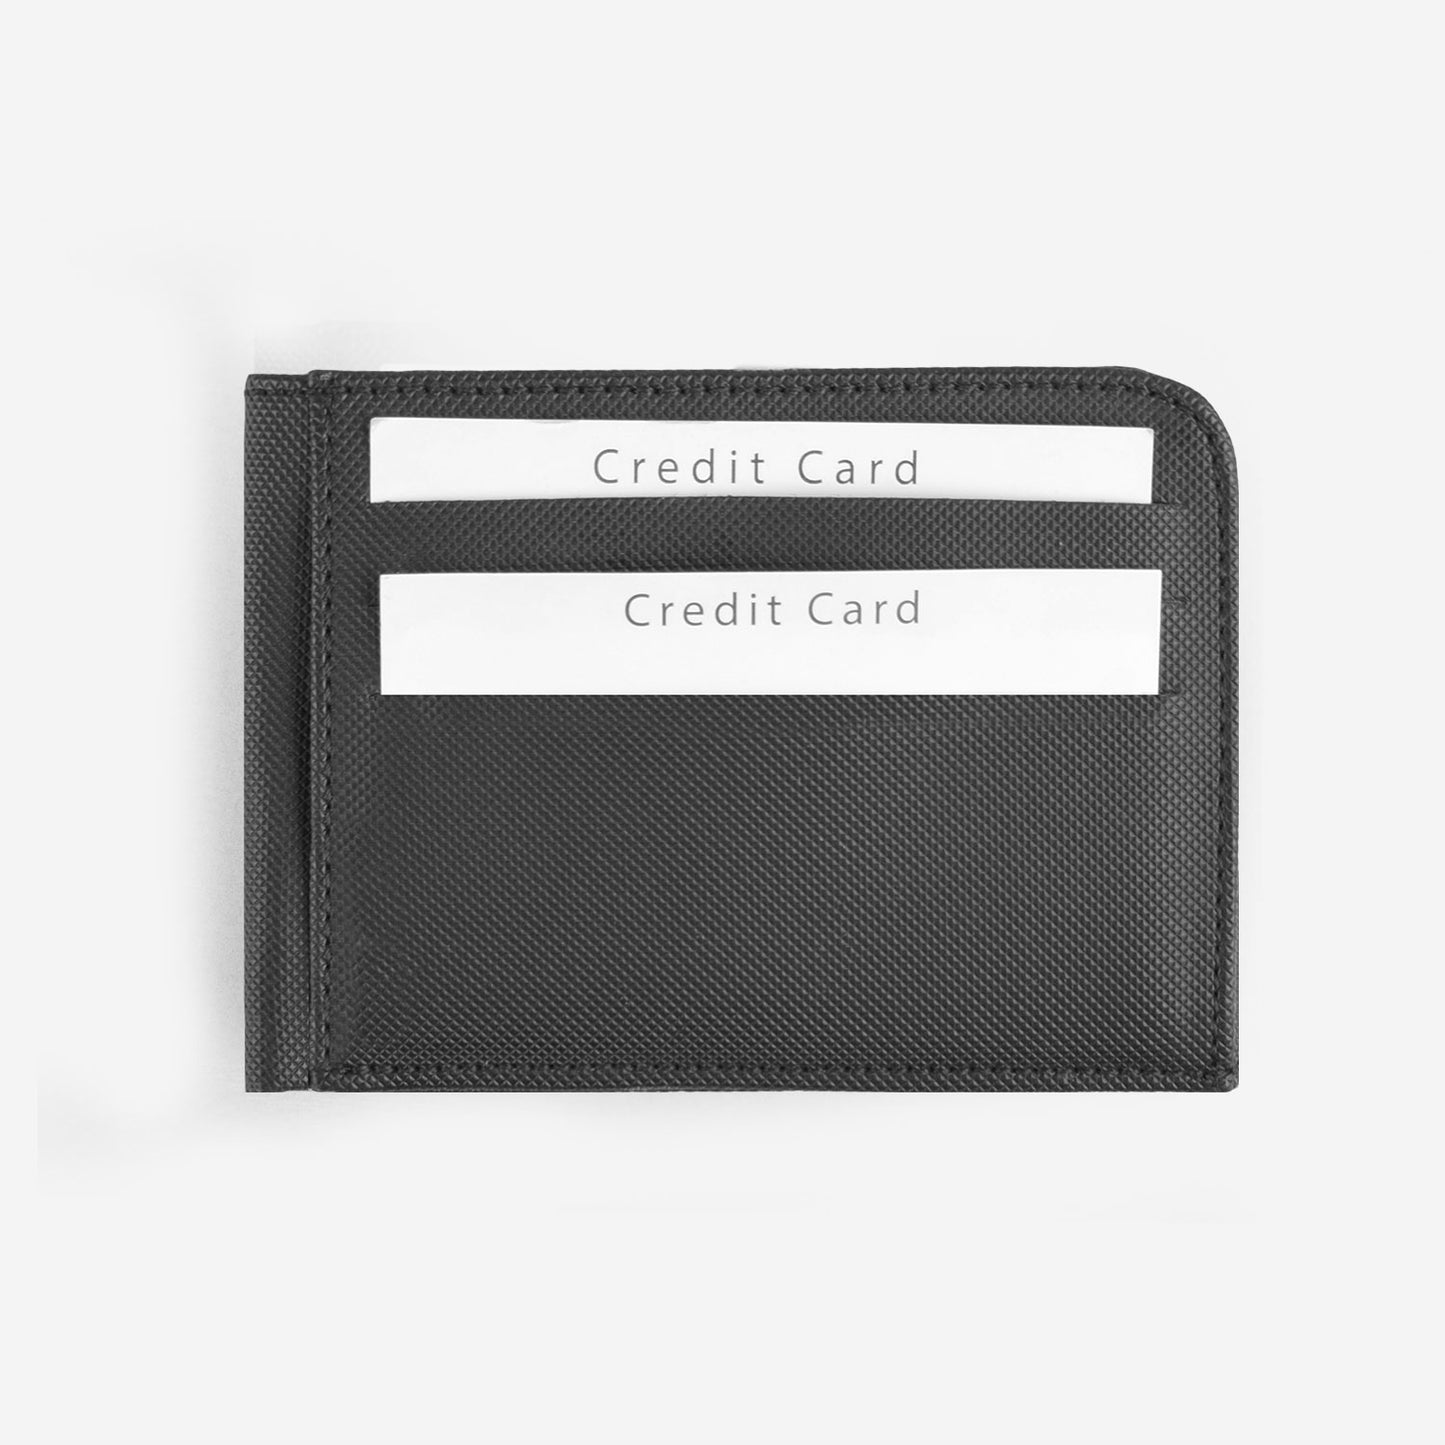 TEXTURED AND RUBBER ENVELOPE